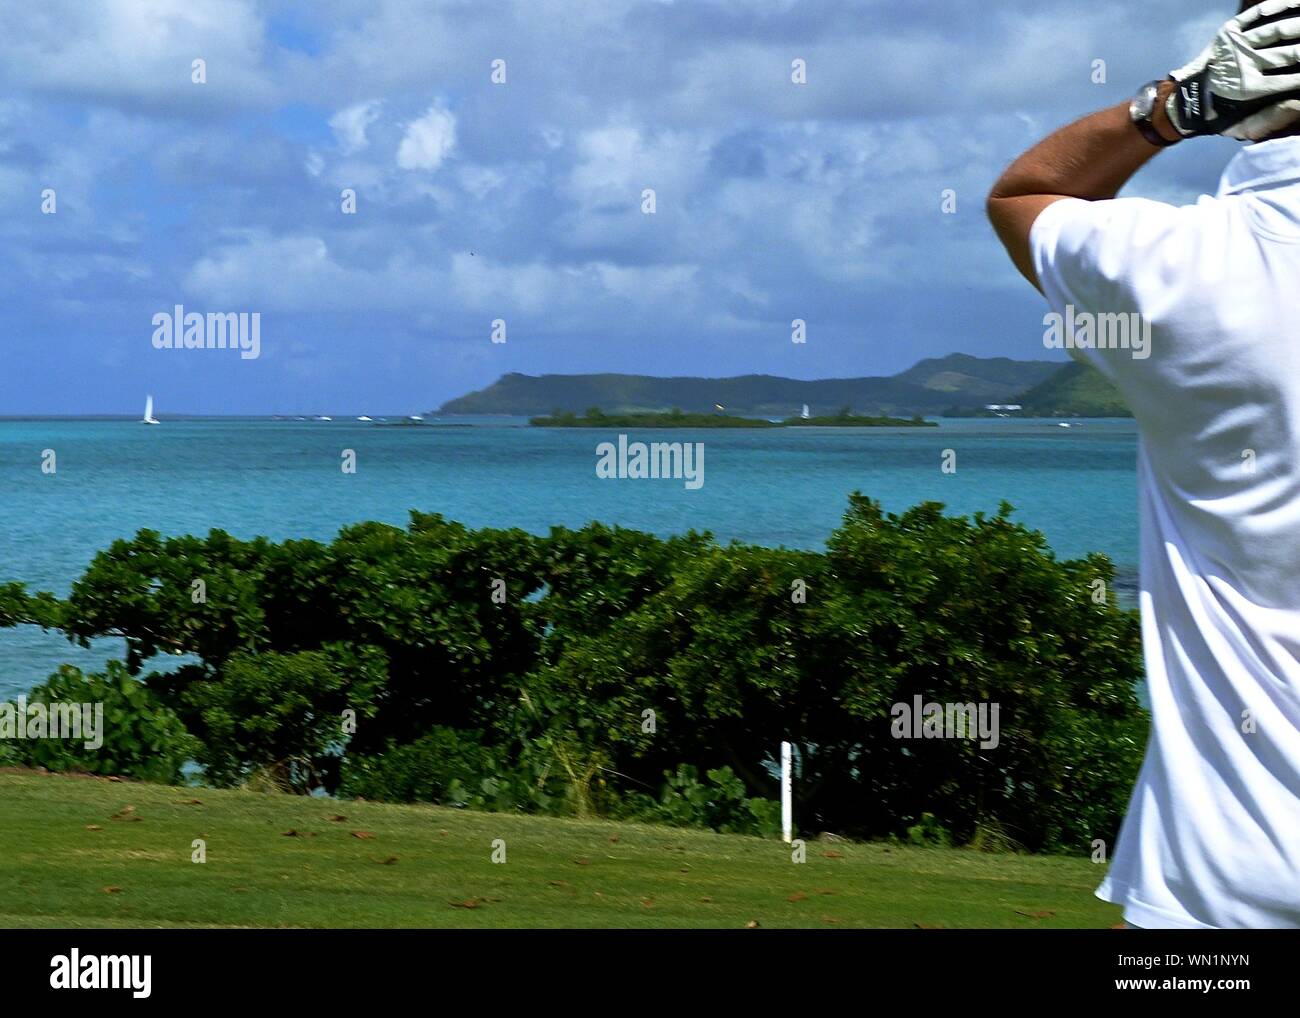 A Man Golfing In Front Of Sea Stock Photo